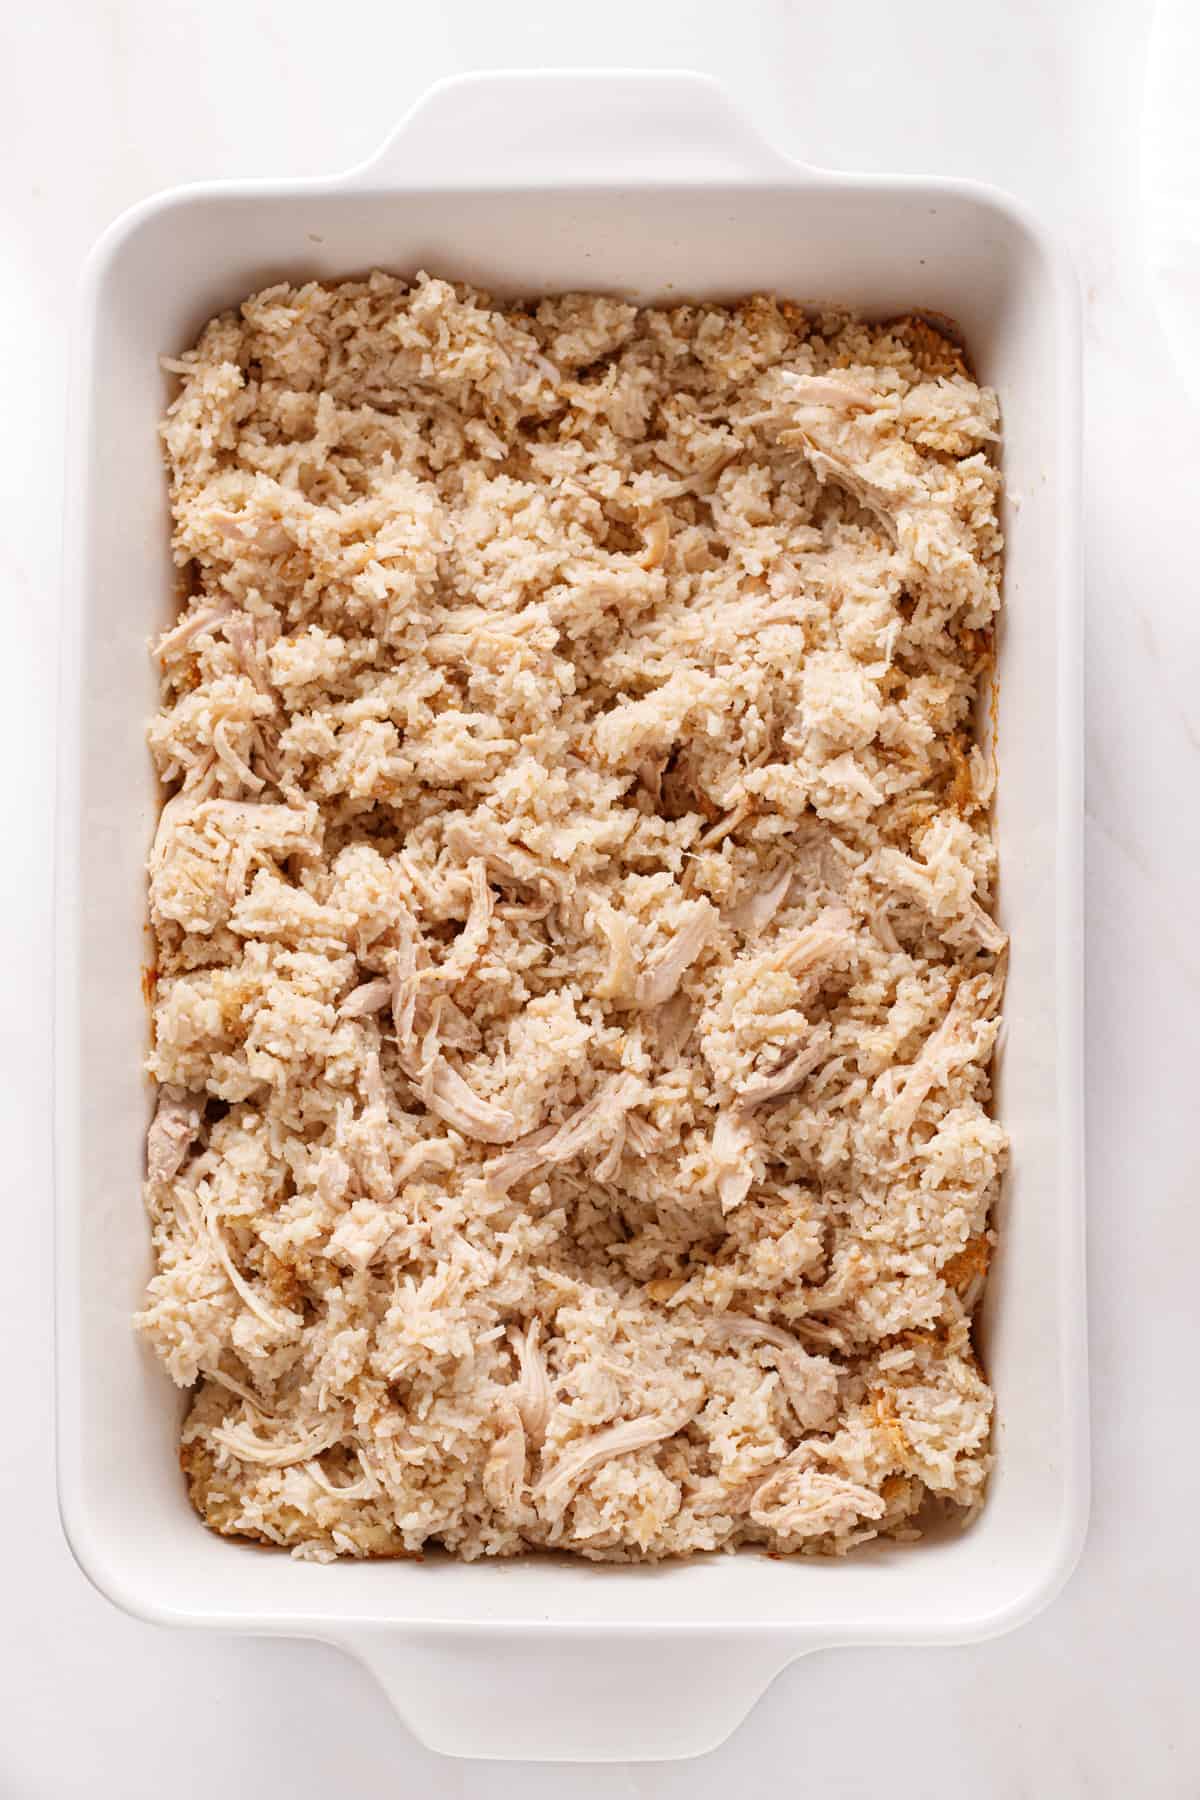 Cooked dairy-free chicken and rice casserole shredded and mixed up.